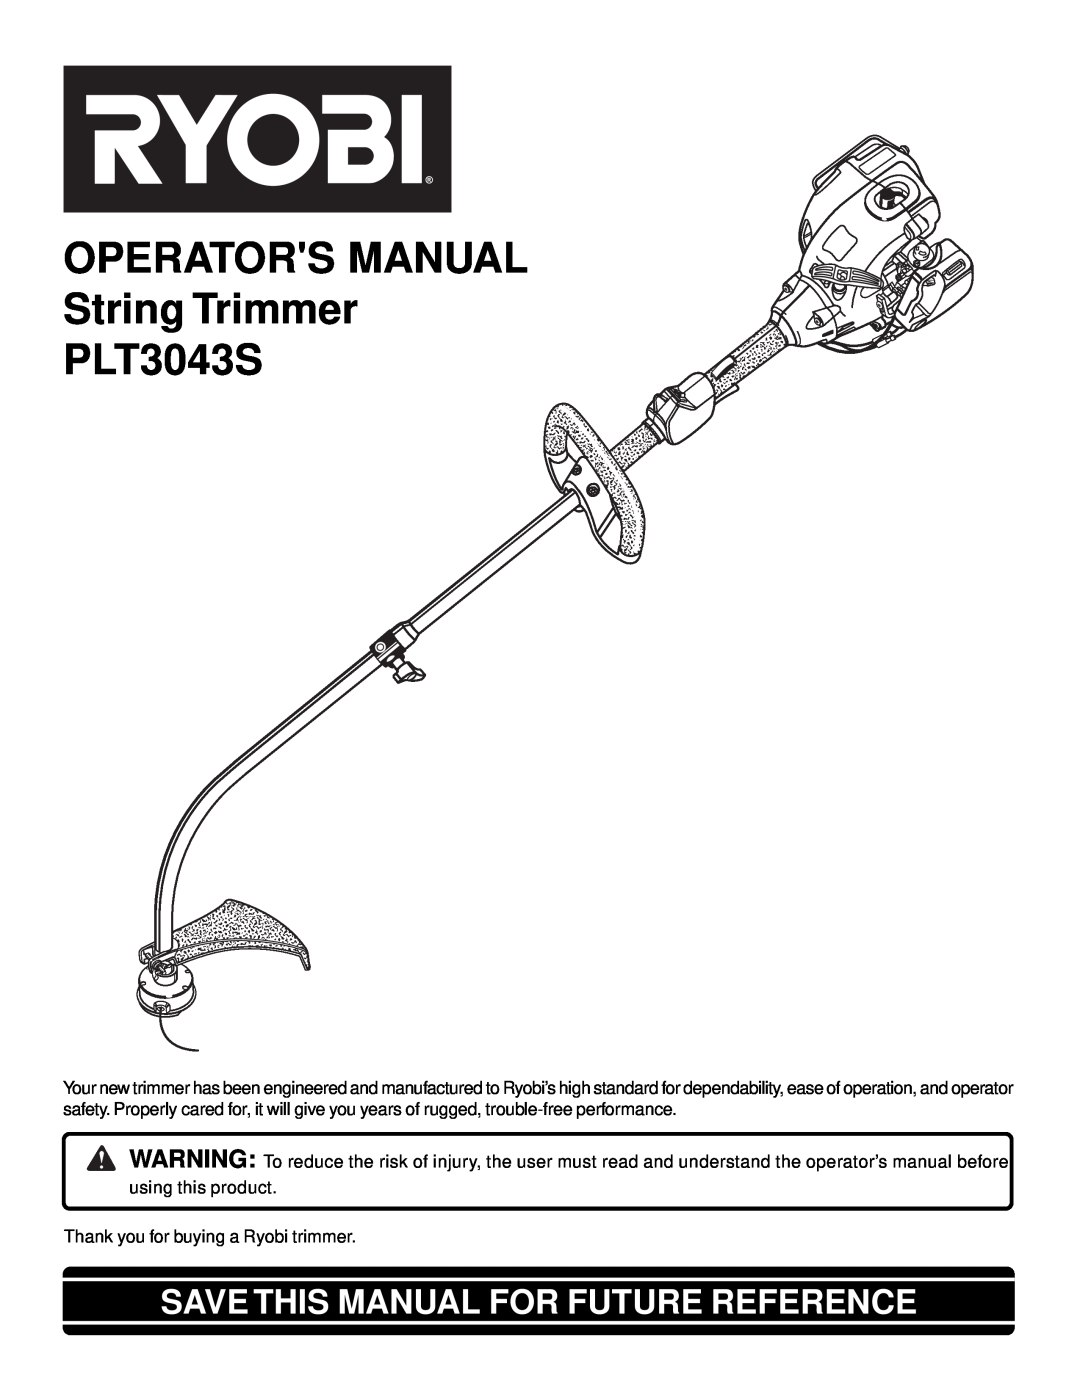 Ryobi manual OPERATORS MANUAL String Trimmer PLT3043S, Save This Manual For Future Reference 